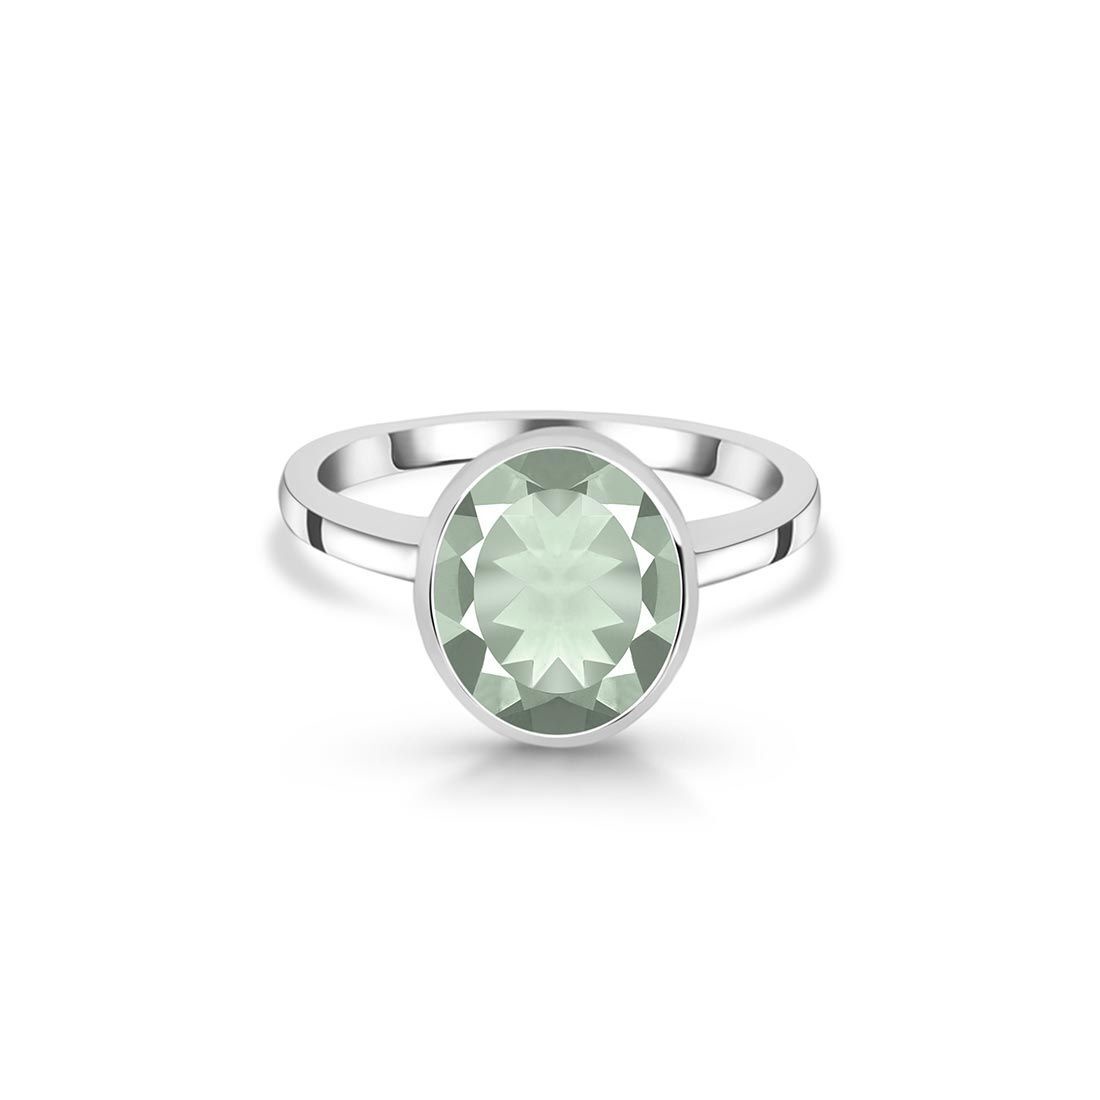 Enhance the Look with Green Amethyst Ring